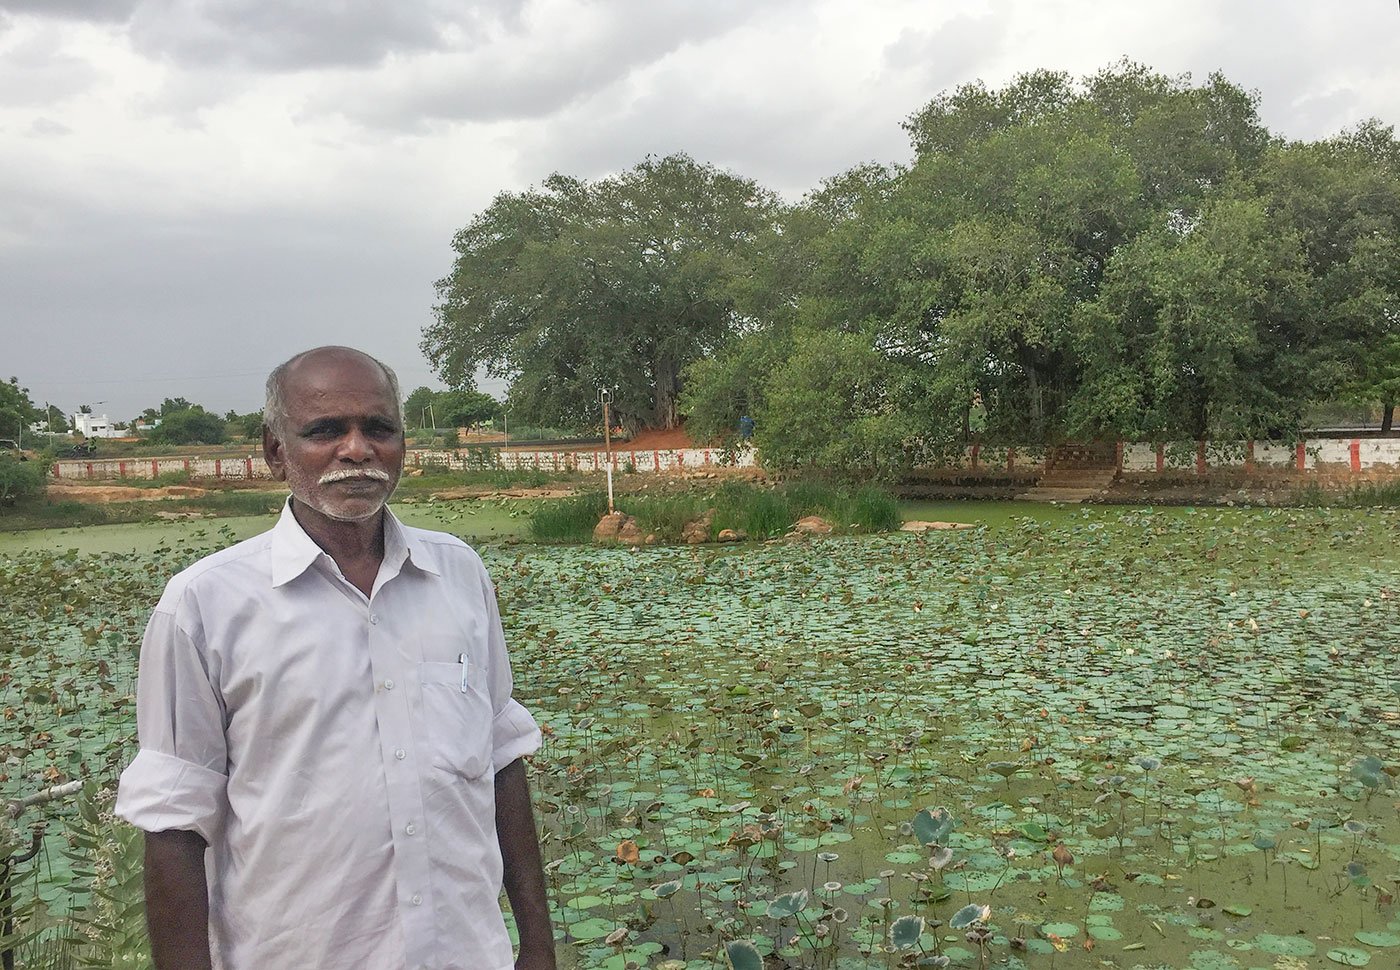 Pon Harichandran standing by a lake filled with lotuses